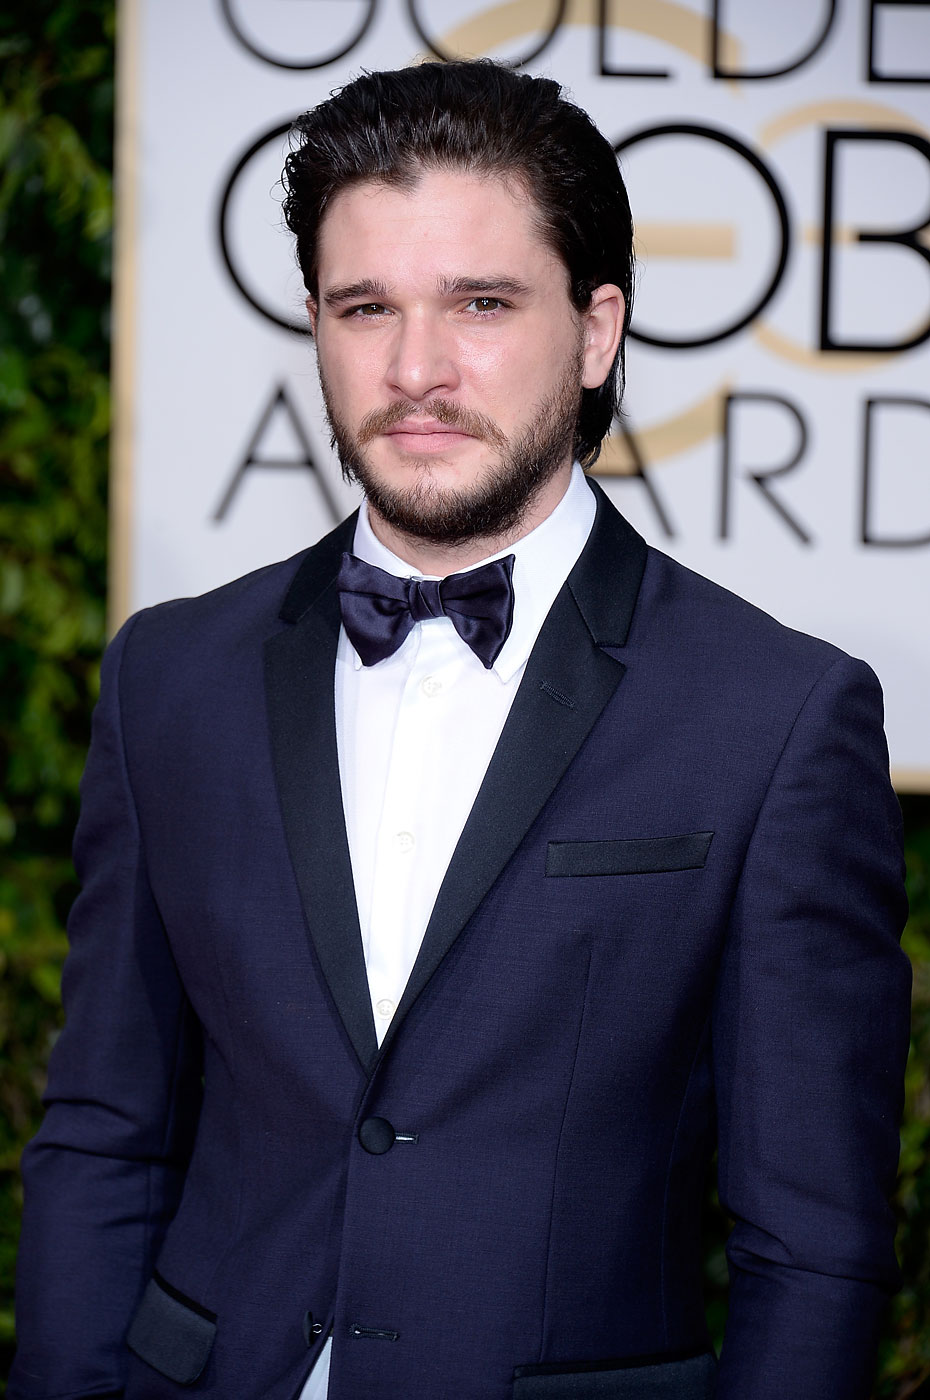 Kit Harington arrives at the 72nd Annual Golden Globe Awards held at The Beverly Hilton Hotel on Jan. 11, 2015 in Beverly Hills, Calif.